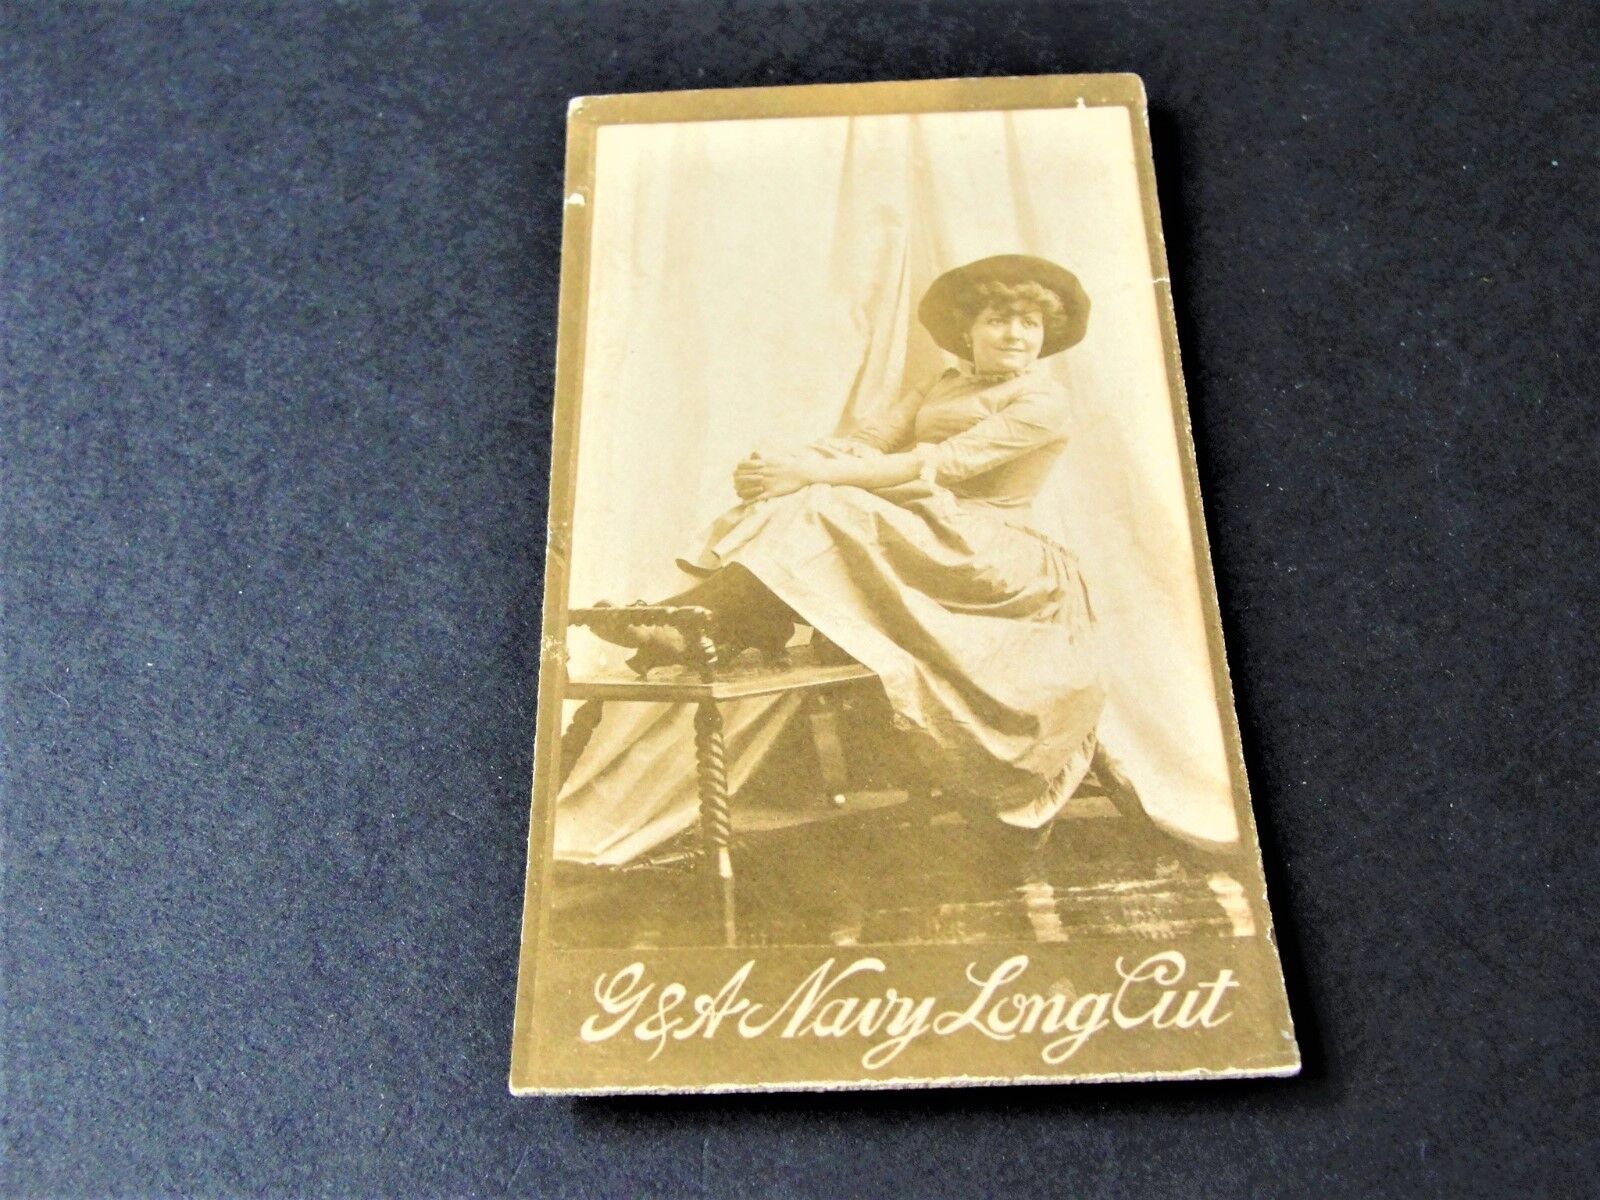 Antique G.W. Gail & Ax's Navy Tobacco Card with black & white image of lady. 